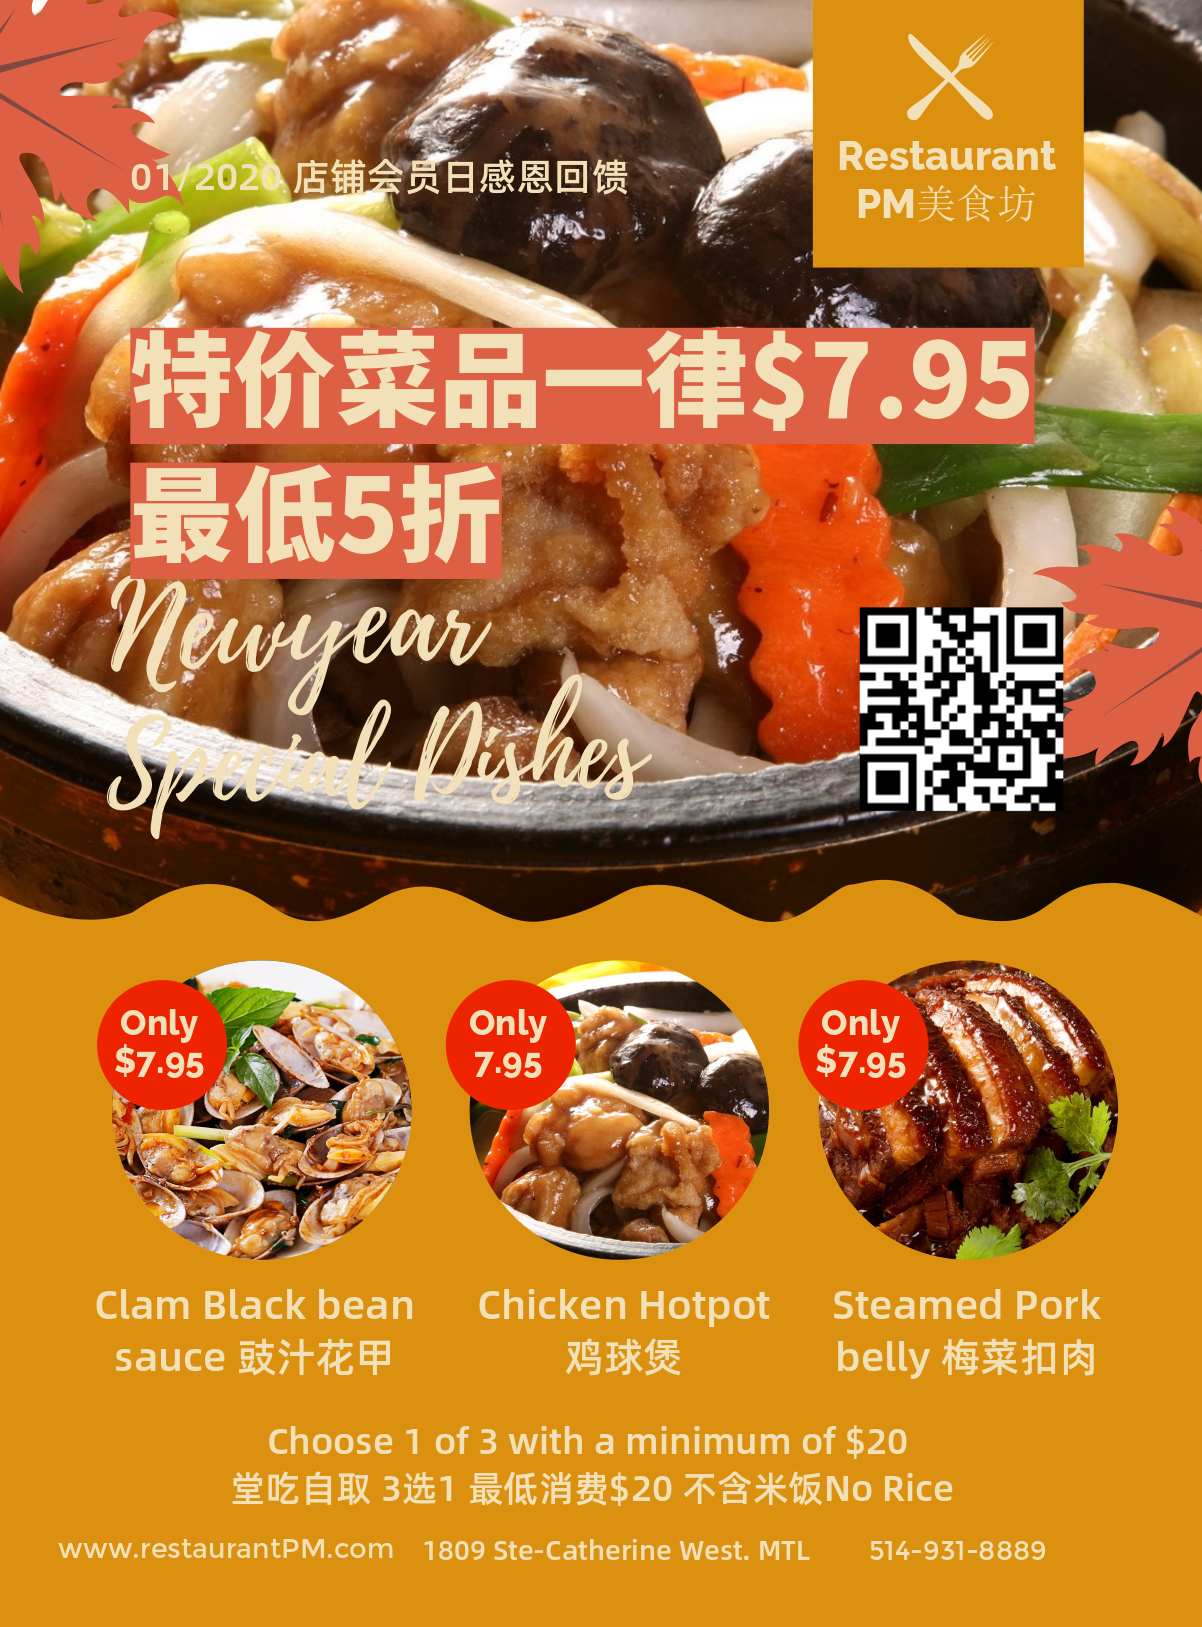 New year special dishes -  up to 50% off